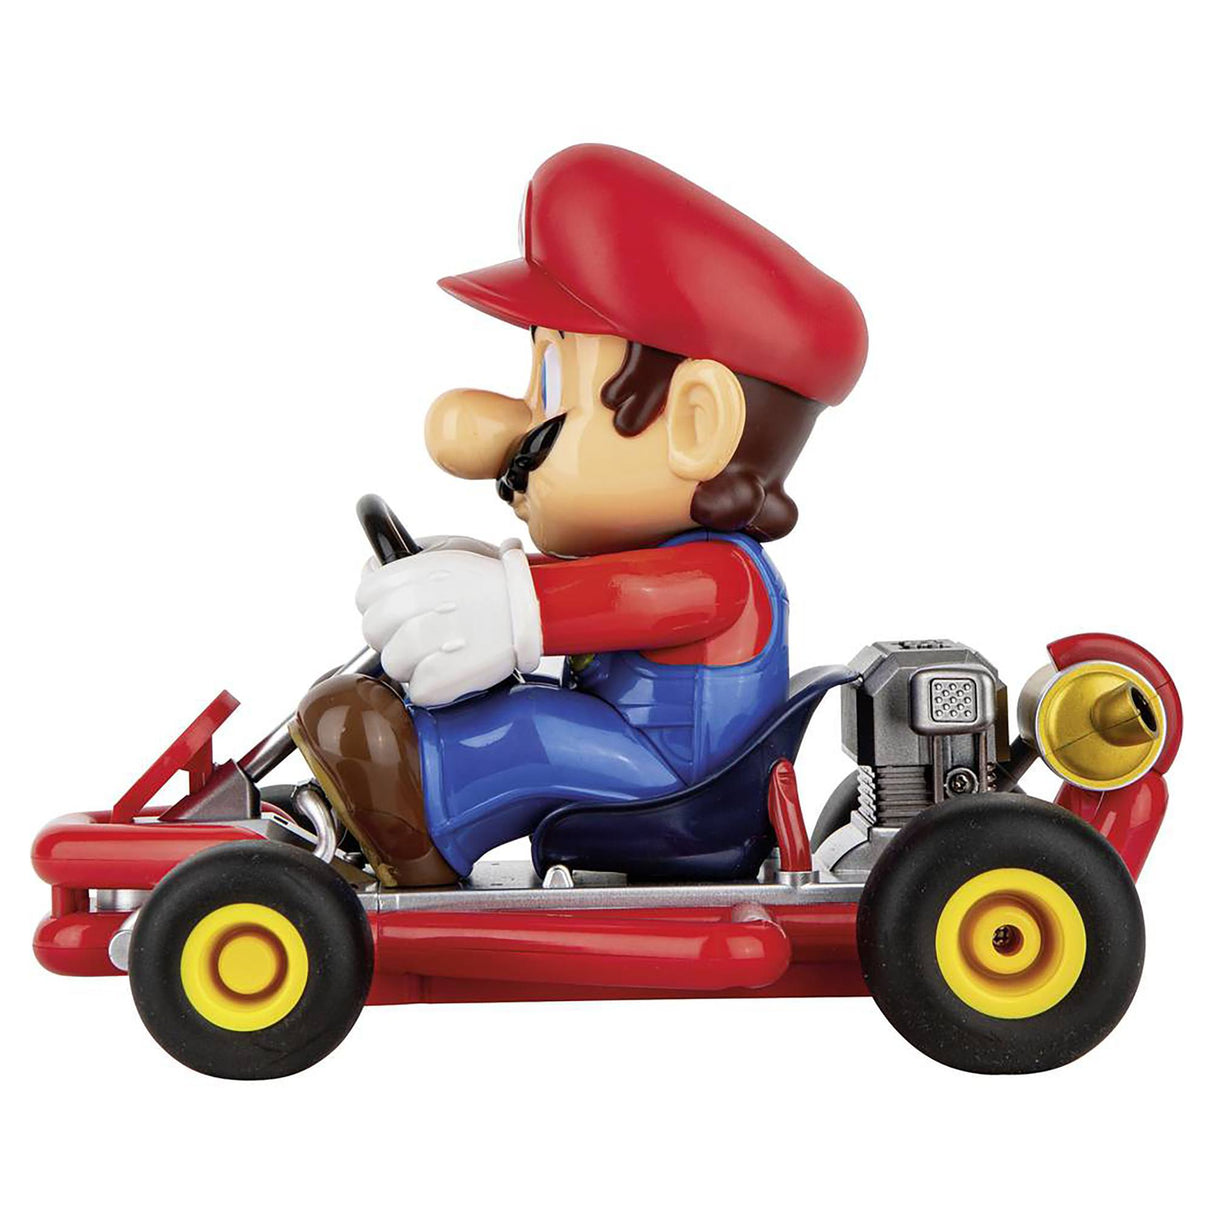 Carrera RC 1:18 Mario in Pipe Kart 2.4GHz Vehicle